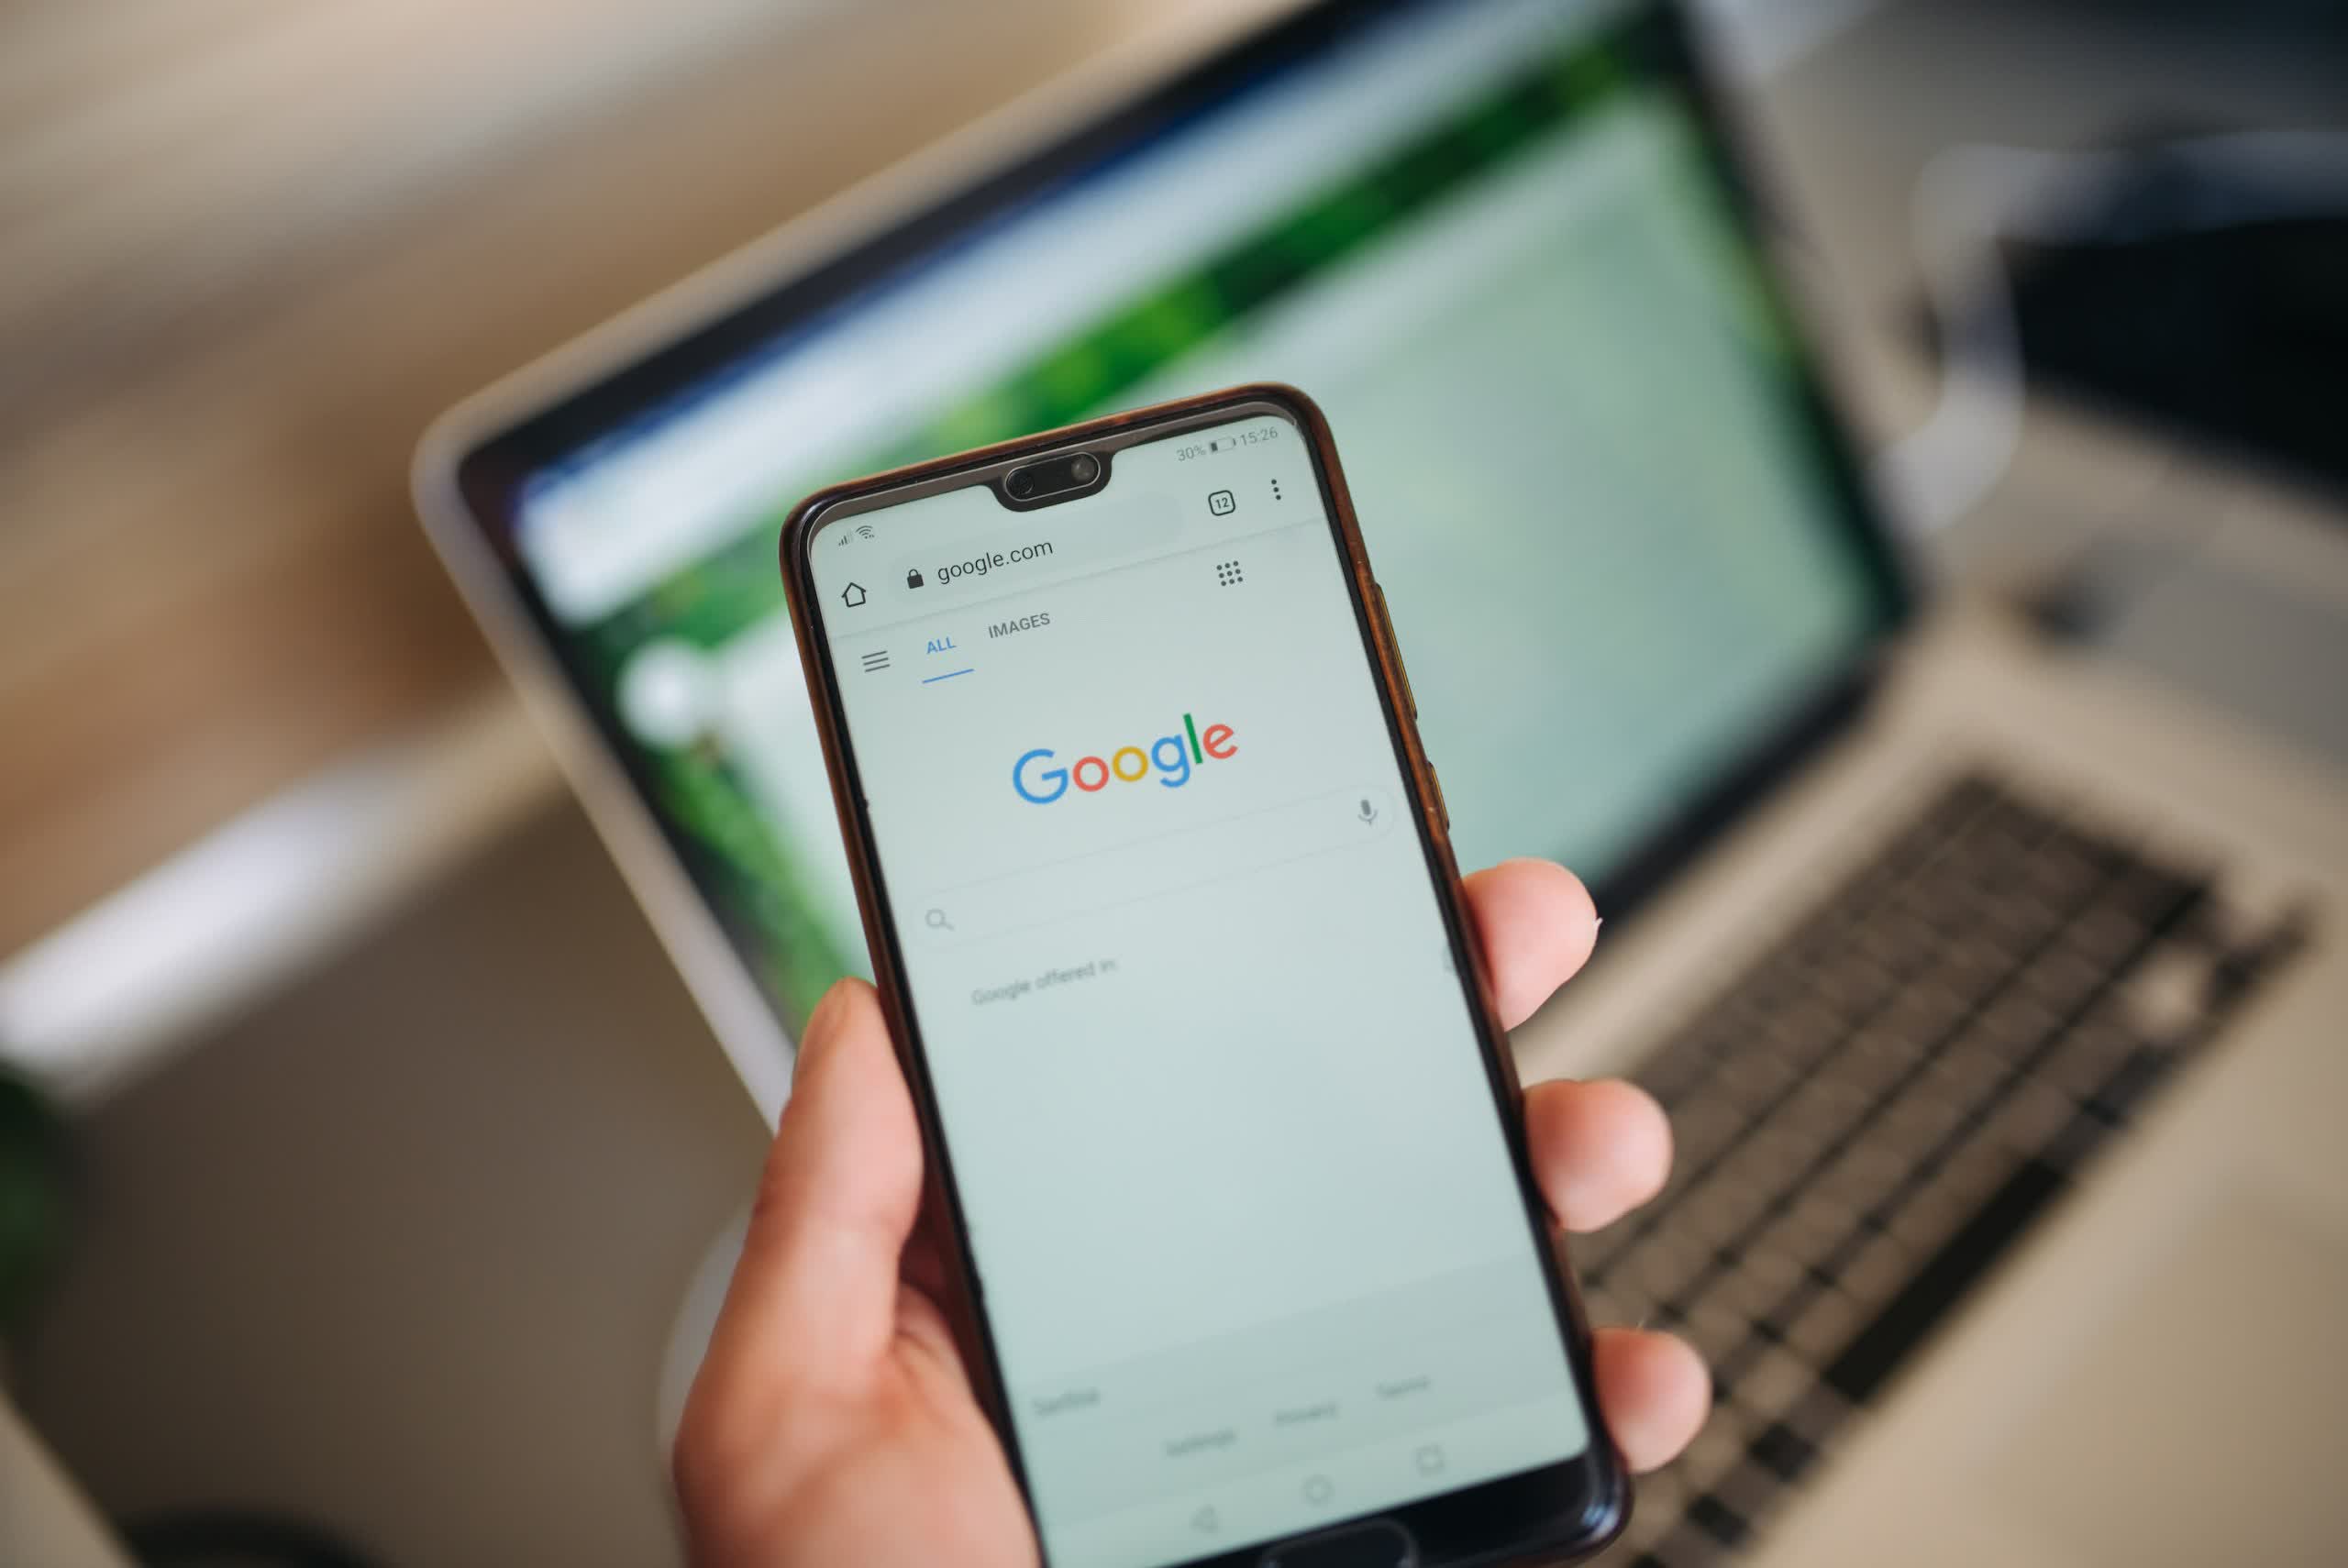 Google is bringing a more personalized Search experience to mobile users